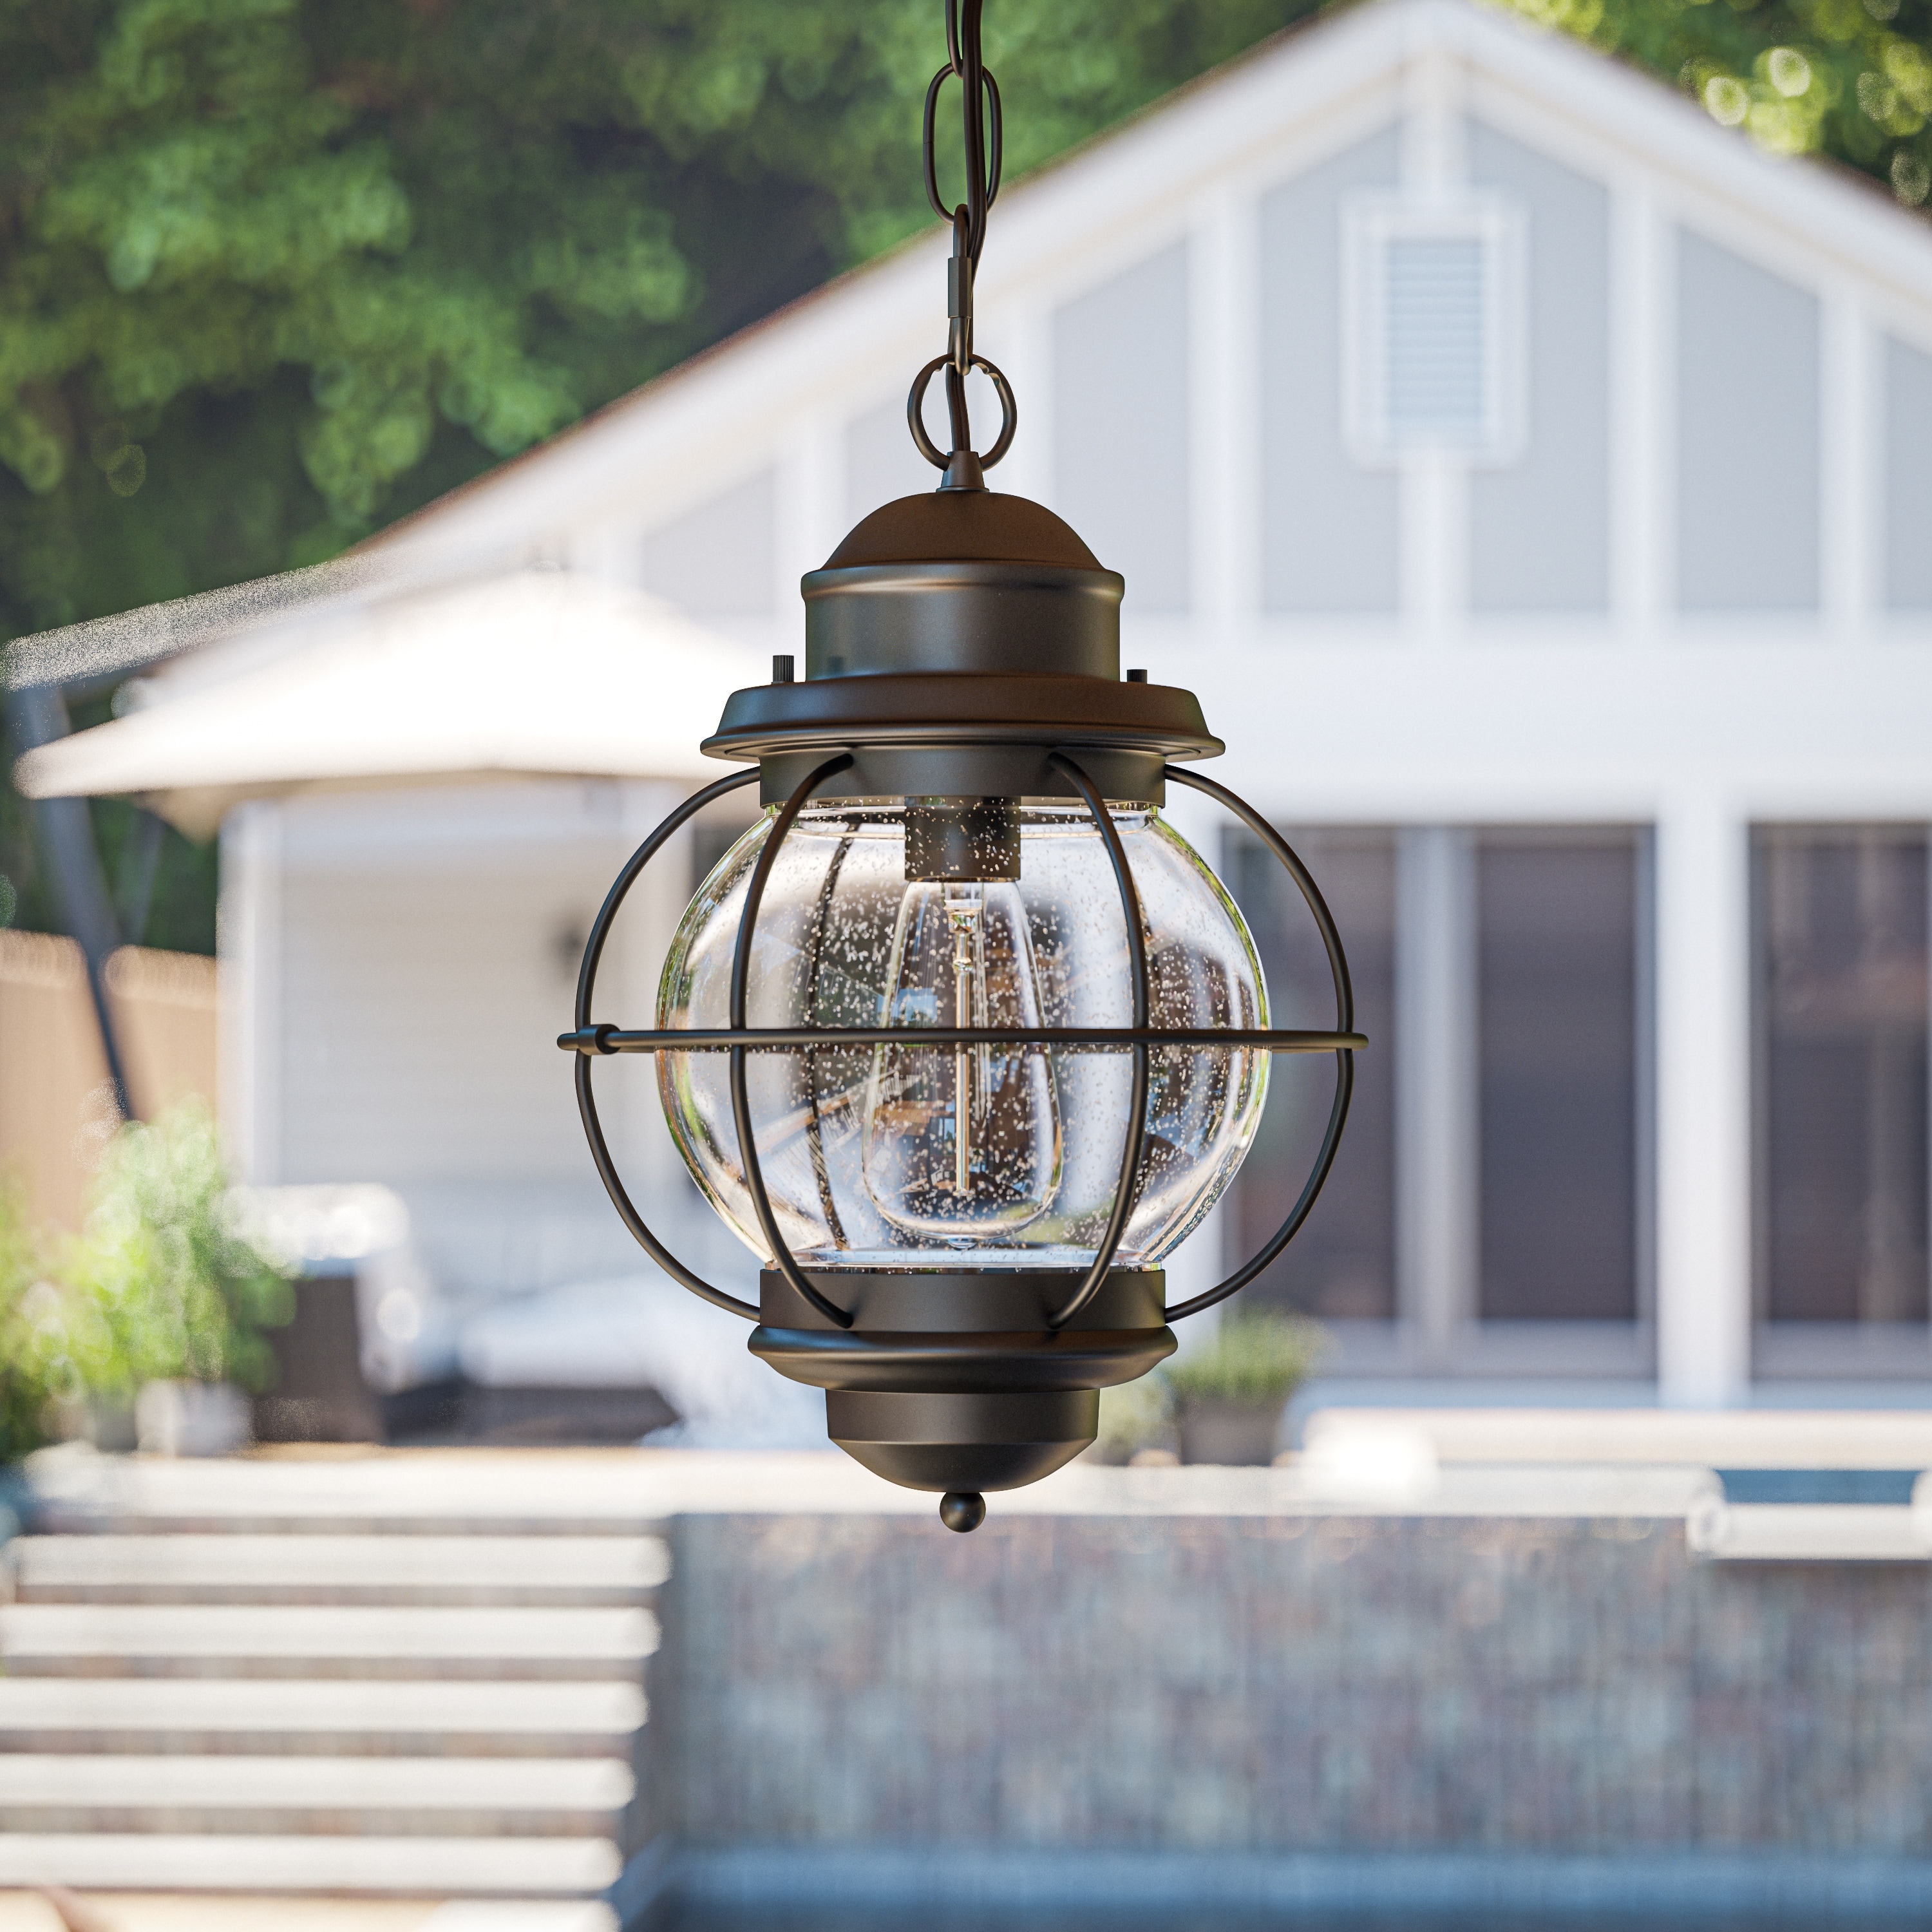 https://ak1.ostkcdn.com/images/products/is/images/direct/a09c5a4bf04da0c962beabd39b0954a097086e98/Elton-1-light-Black-Indoor--Outdoor-Hanging-Lantern.jpg